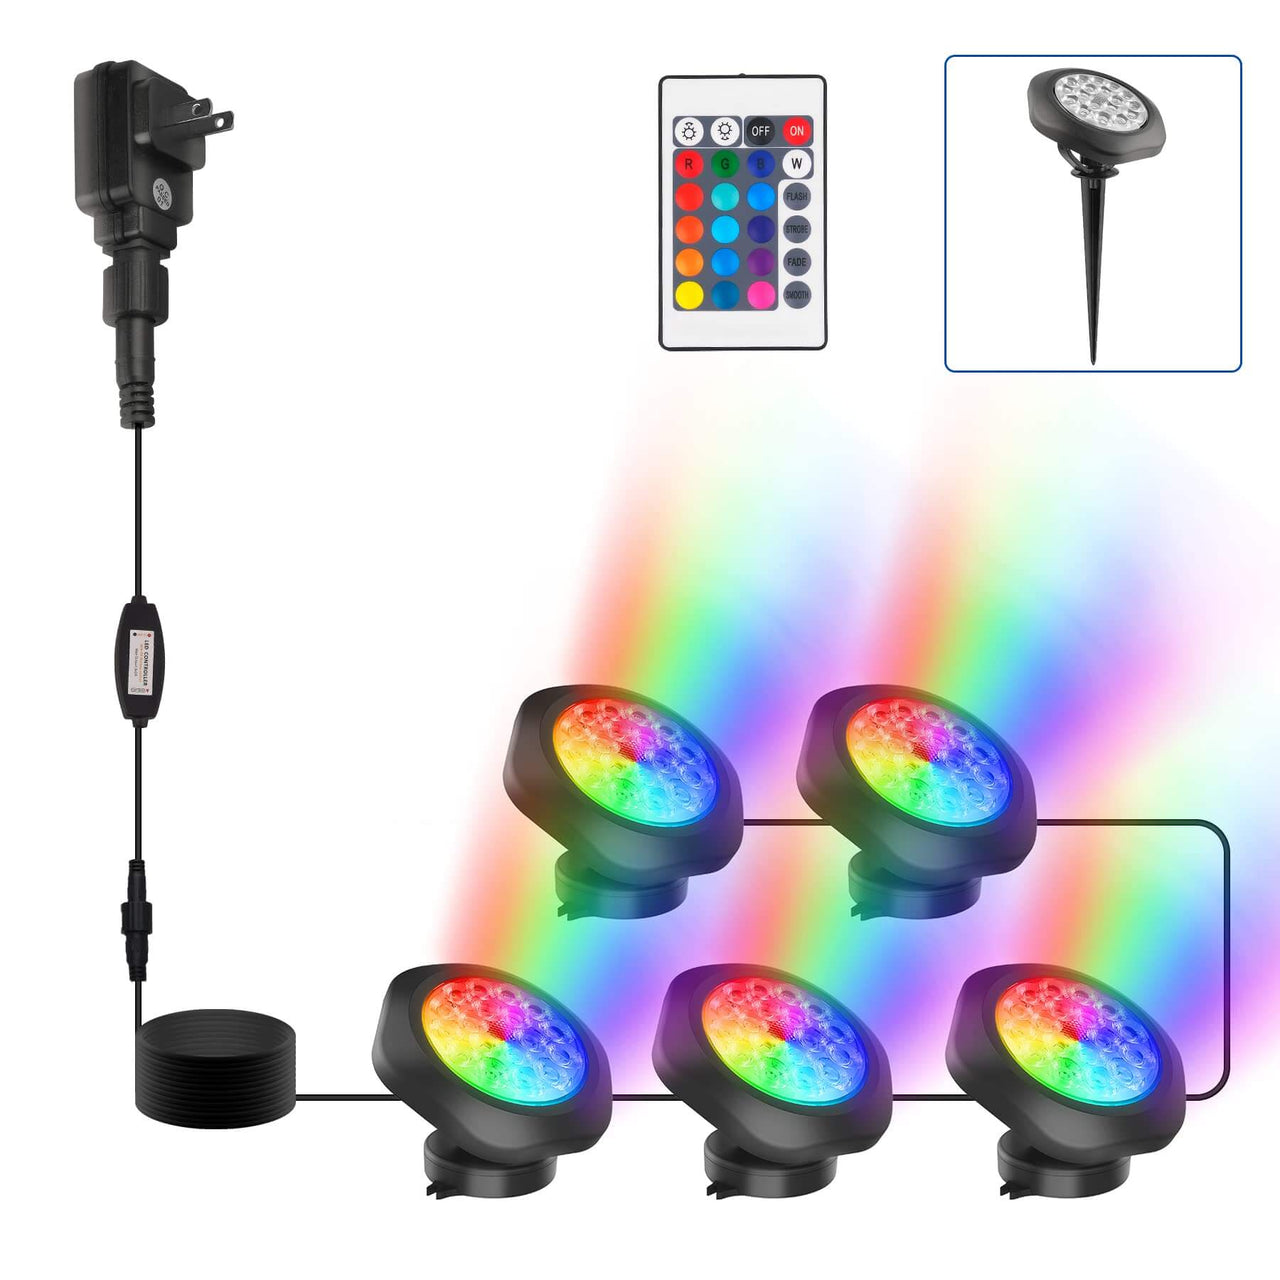 5 in 1 RGB LED Pond Lights Waterproof with RC